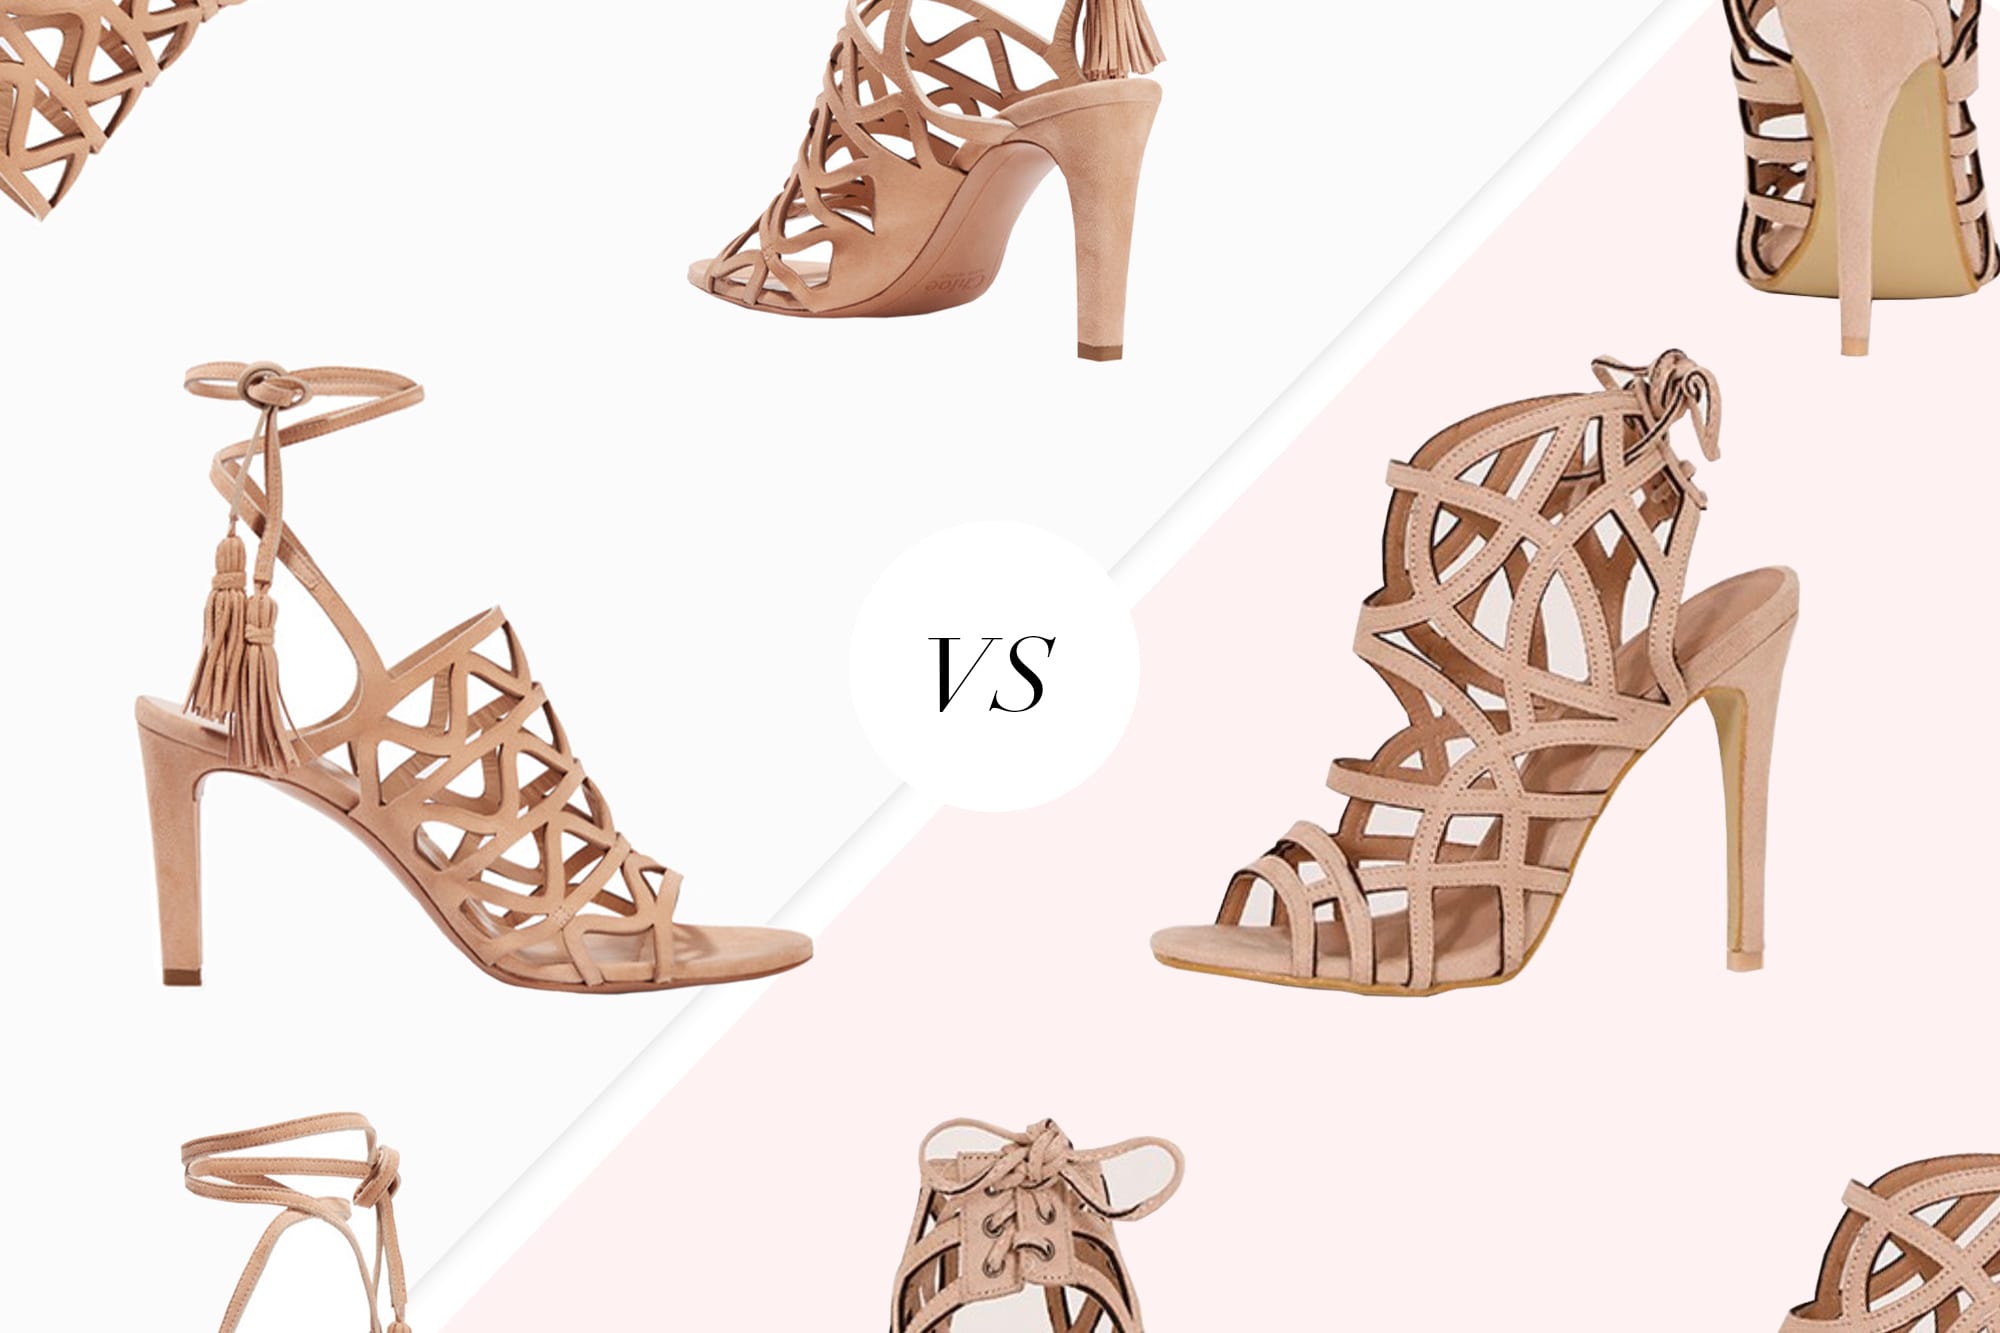 Save Vs Splurge: The £15 Take On Chloé’s Cutout Suede Sandals